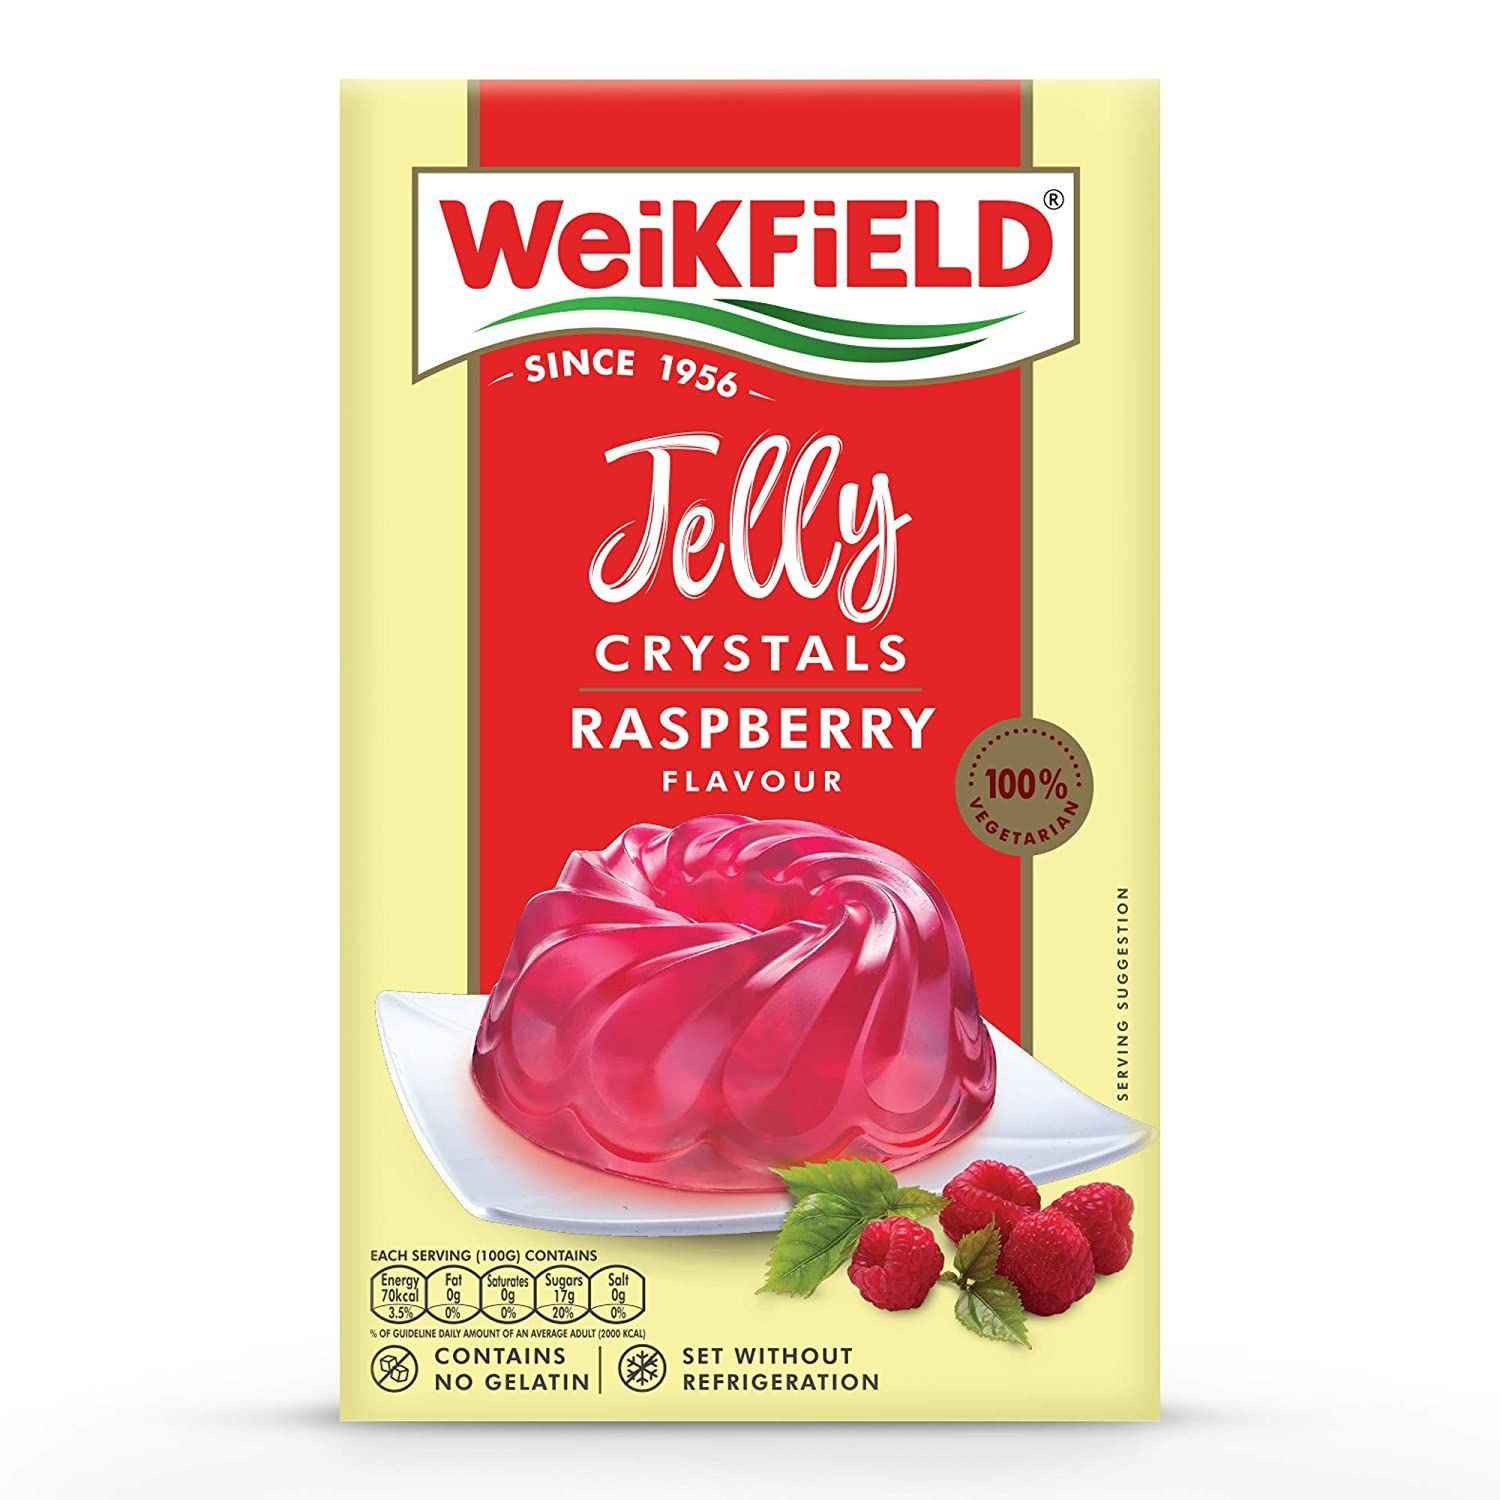 Weikfield Jelly Crystals Raspberry Image